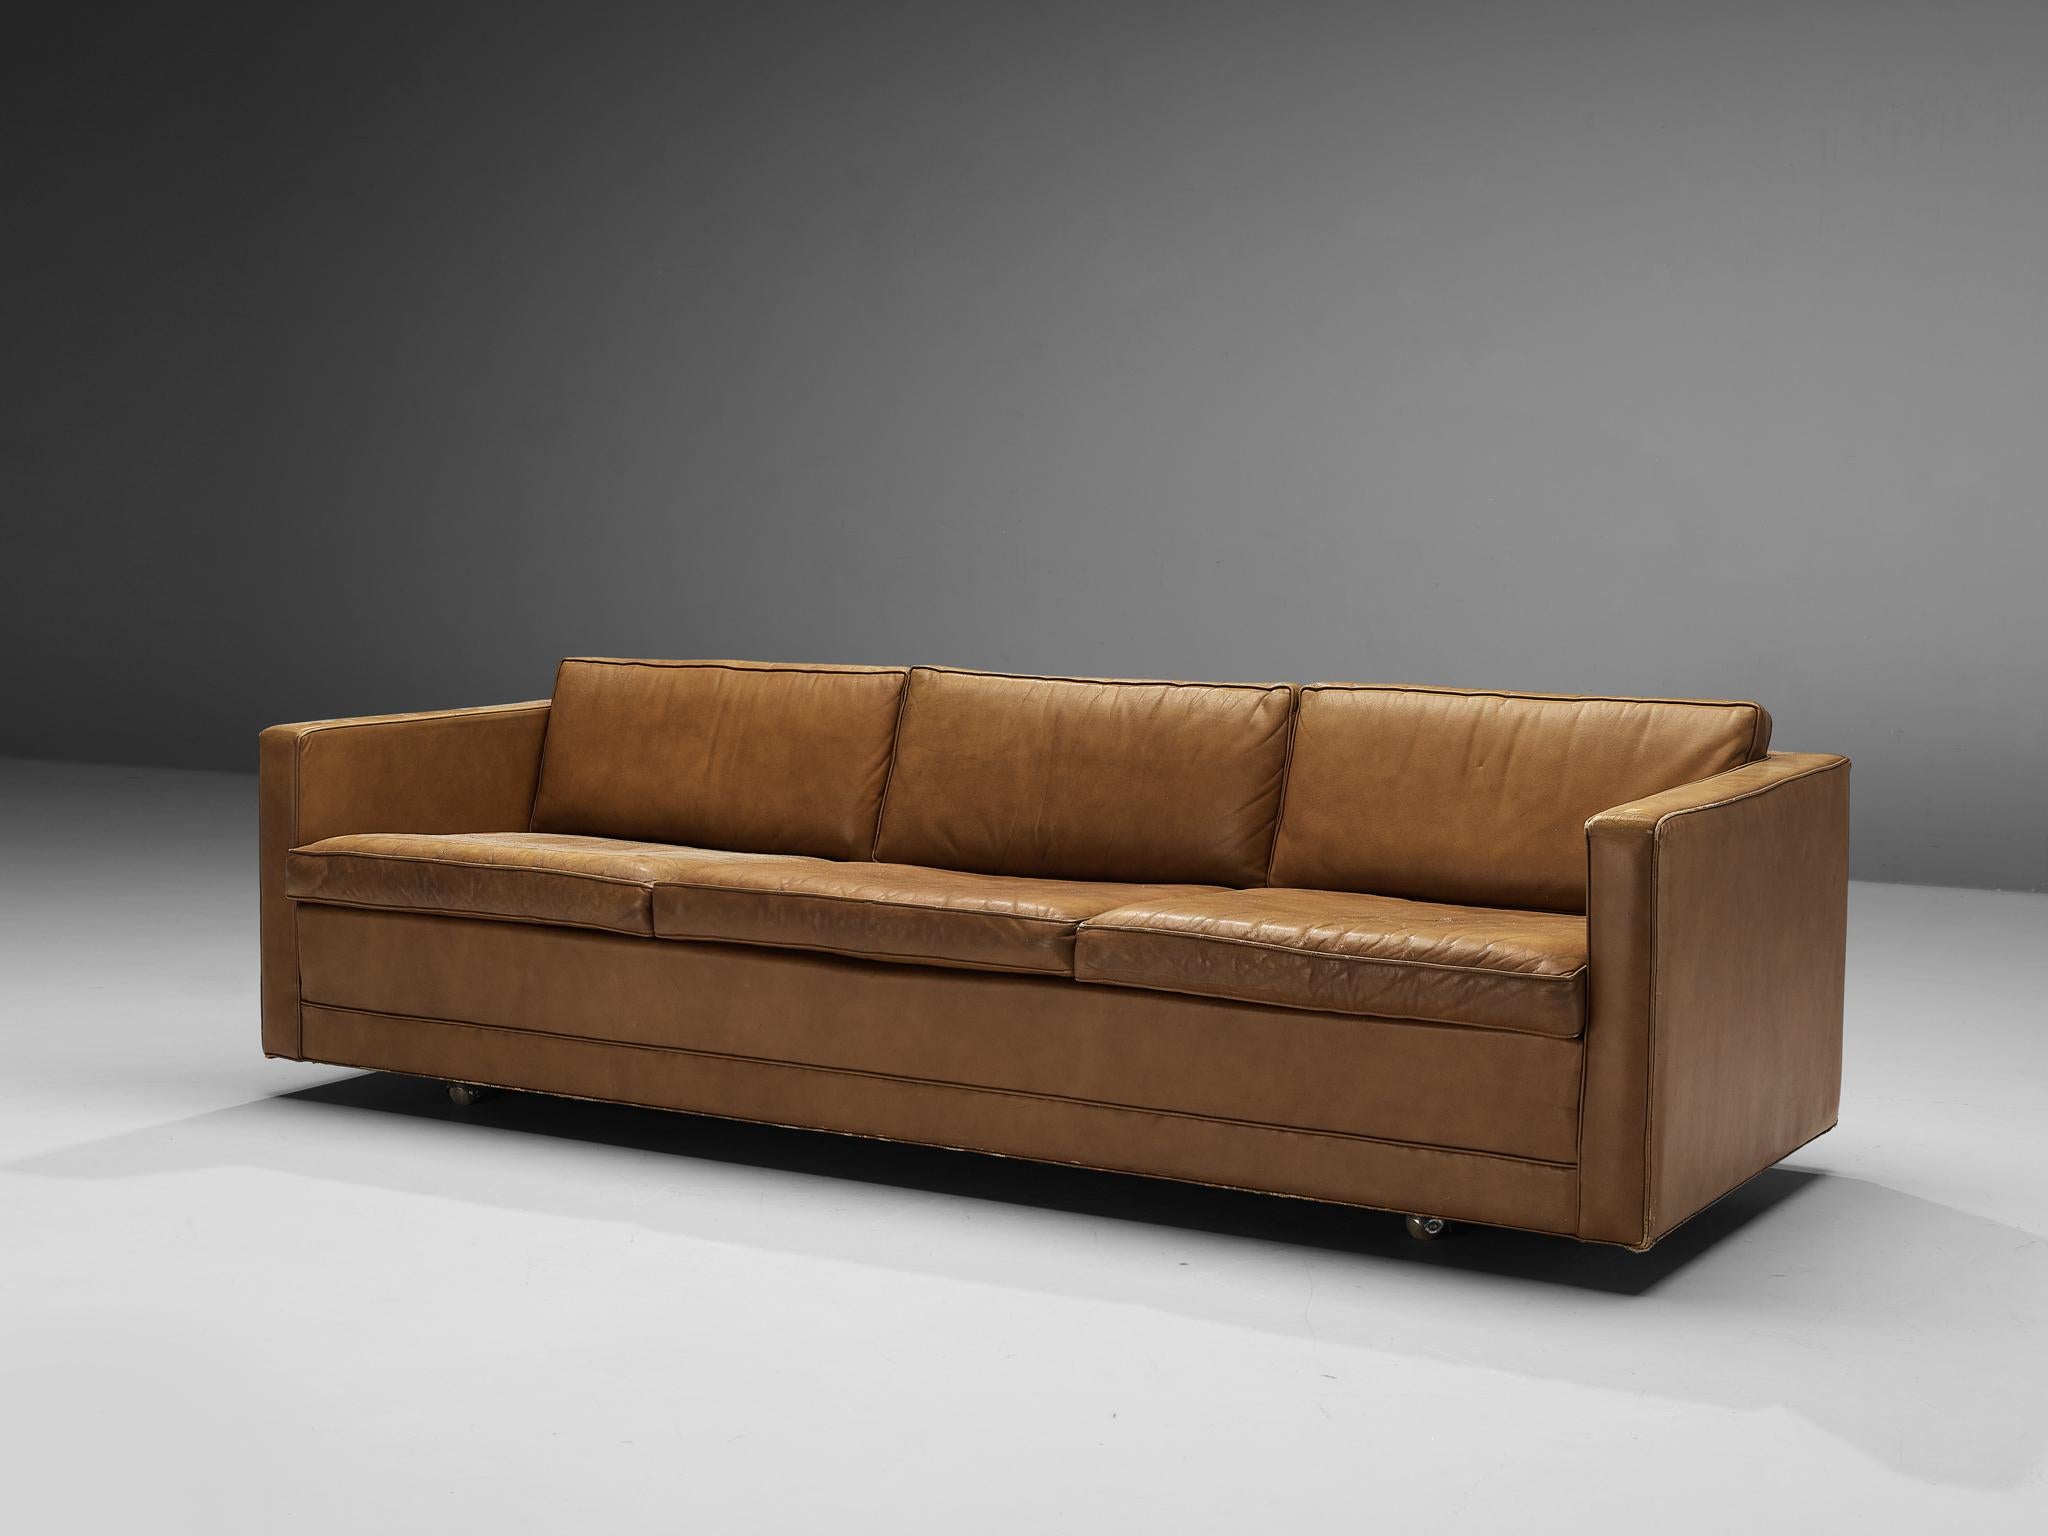 Artifort, sofa, leather, metal, The Netherlands, 1970s

This cubic sofa features clear lines that result in a bold look. The backrest and armrests are on the same height. The patinated brown leather upholstery complements the strong design of the